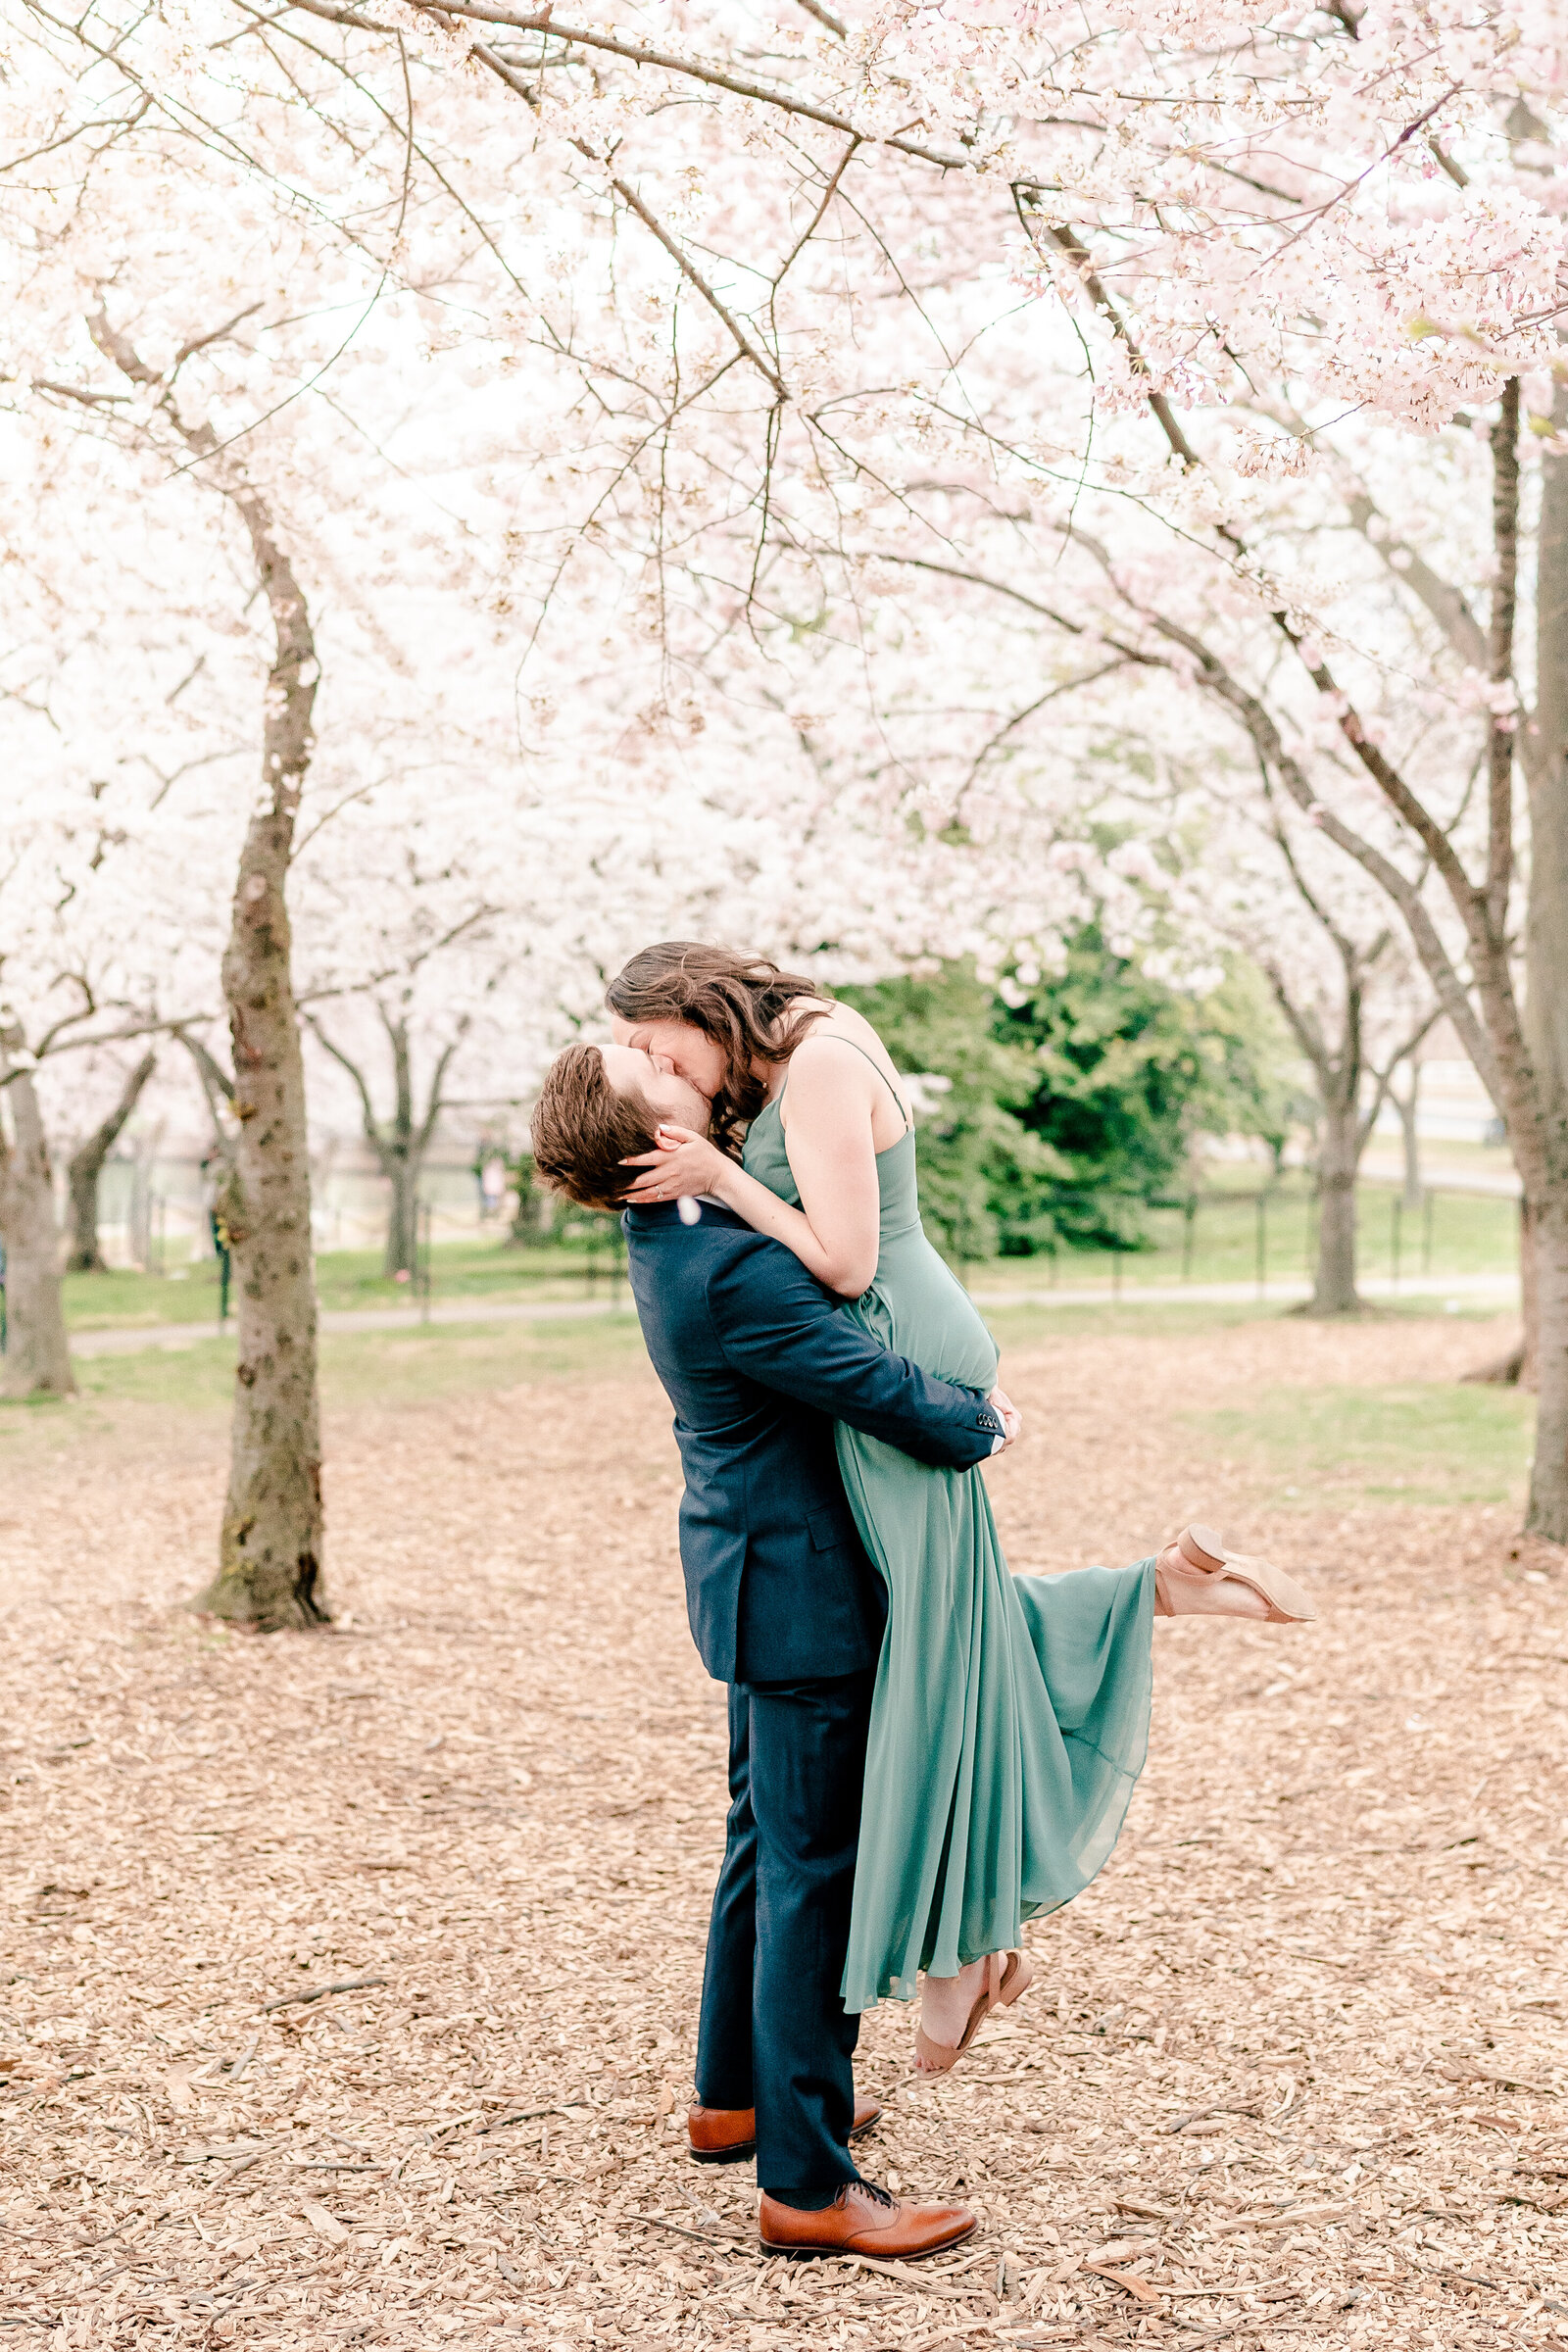 An engaged couple shares a kiss under cherry blossoms during their engagement session in Washington DC